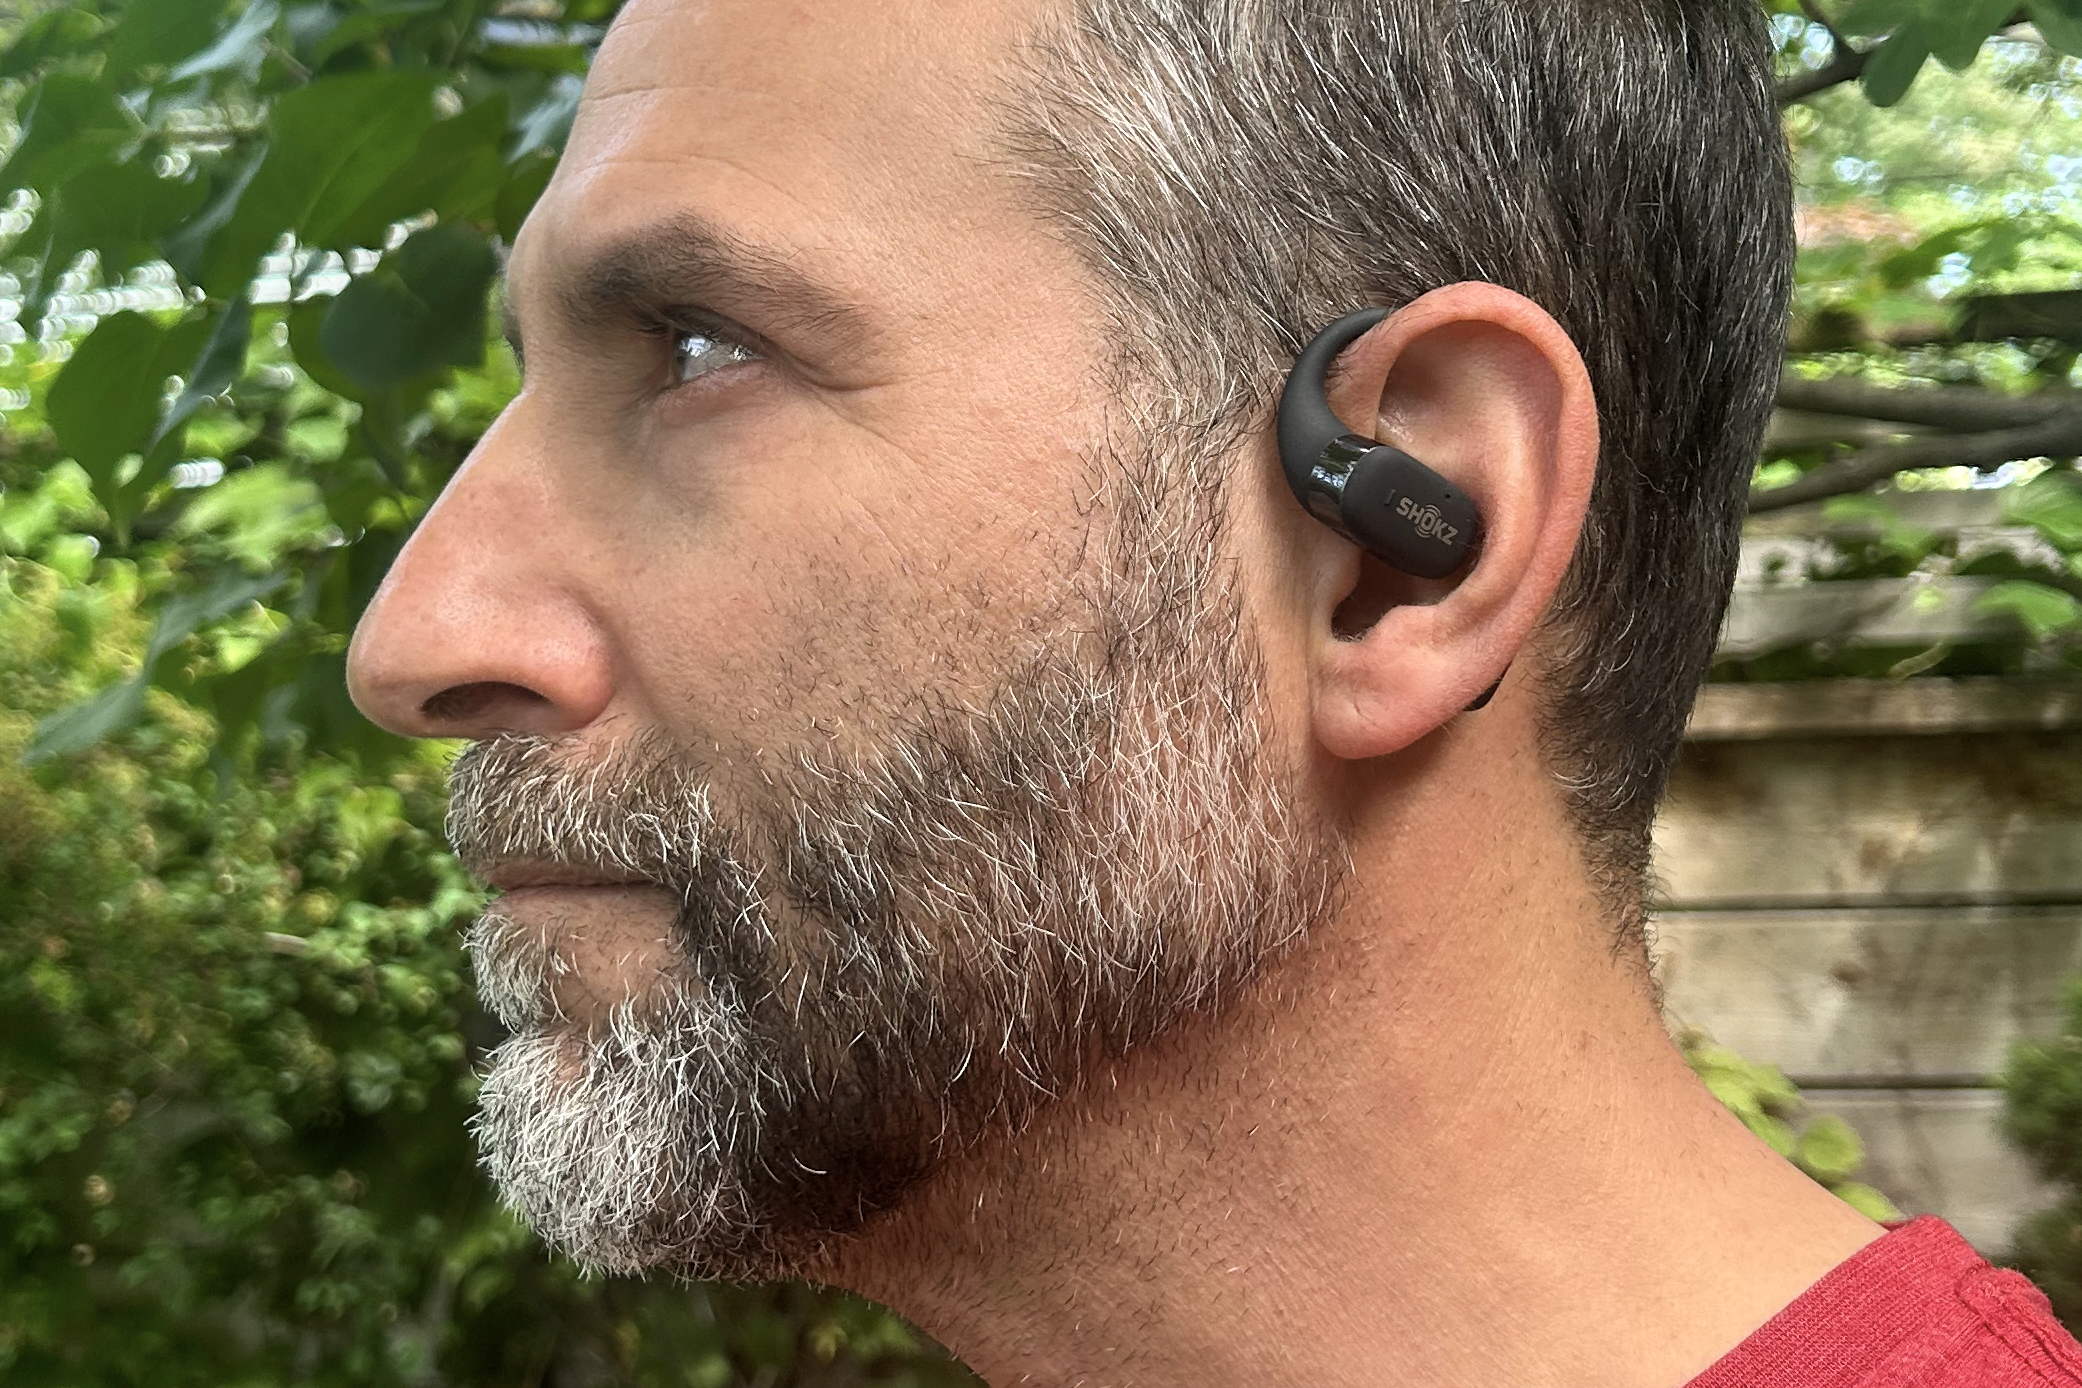 Shokz OpenFit review: the most comfortable earbuds in the world